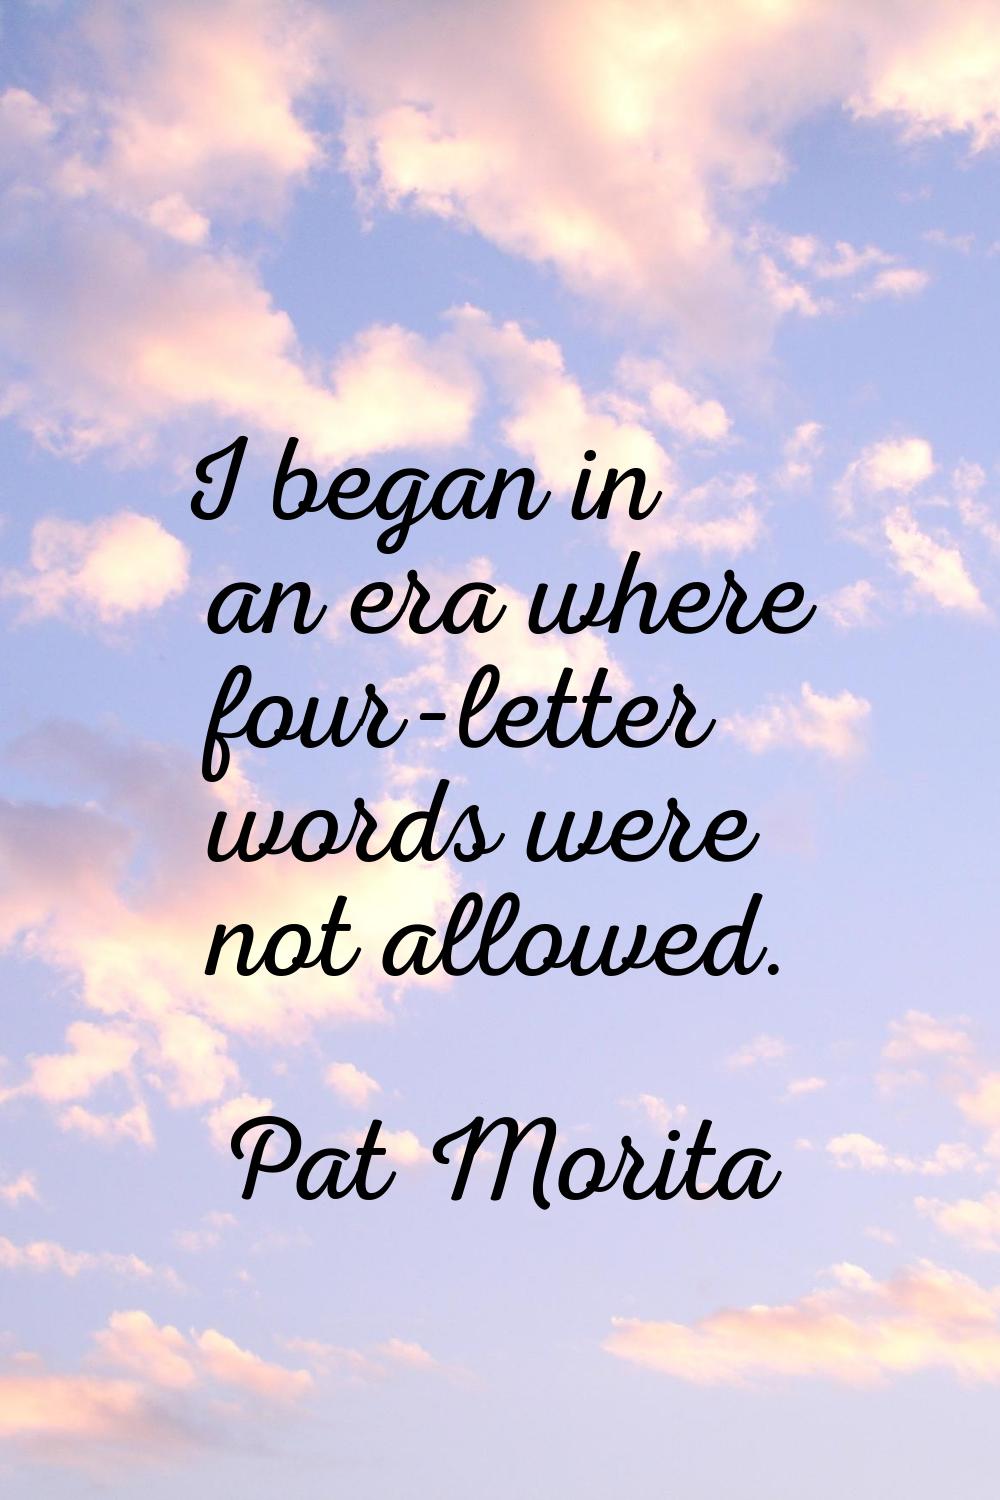 I began in an era where four-letter words were not allowed.